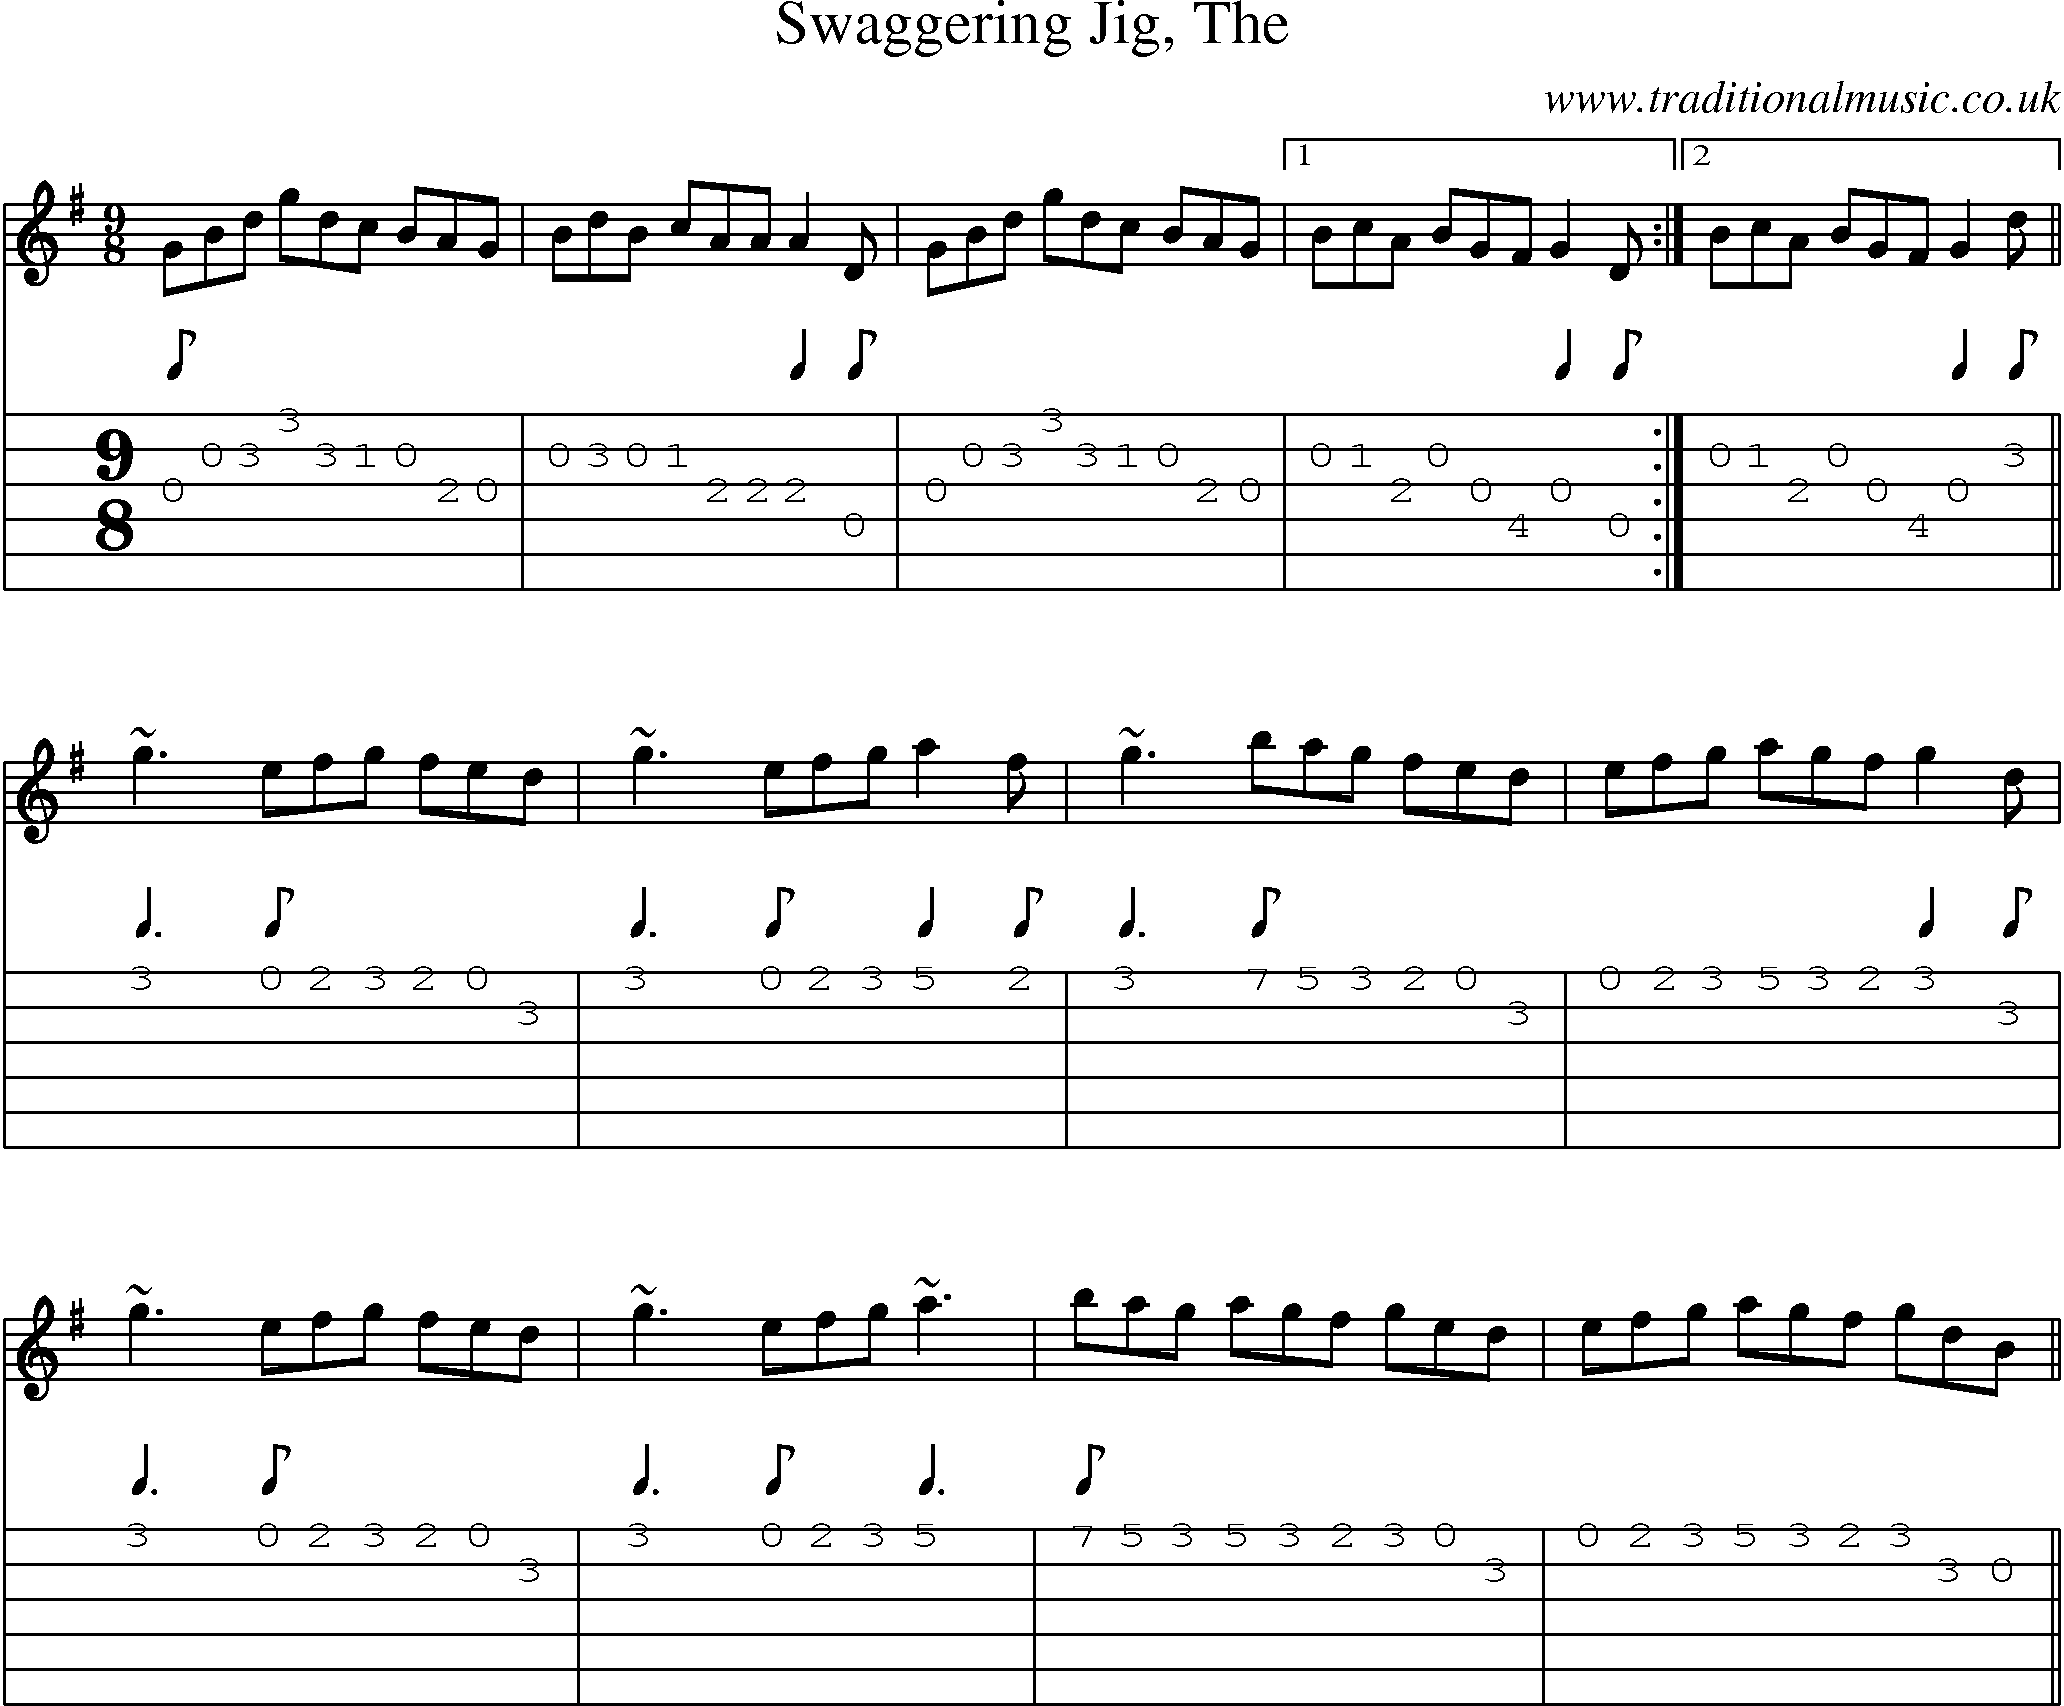 Music Score and Guitar Tabs for Swaggering Jig